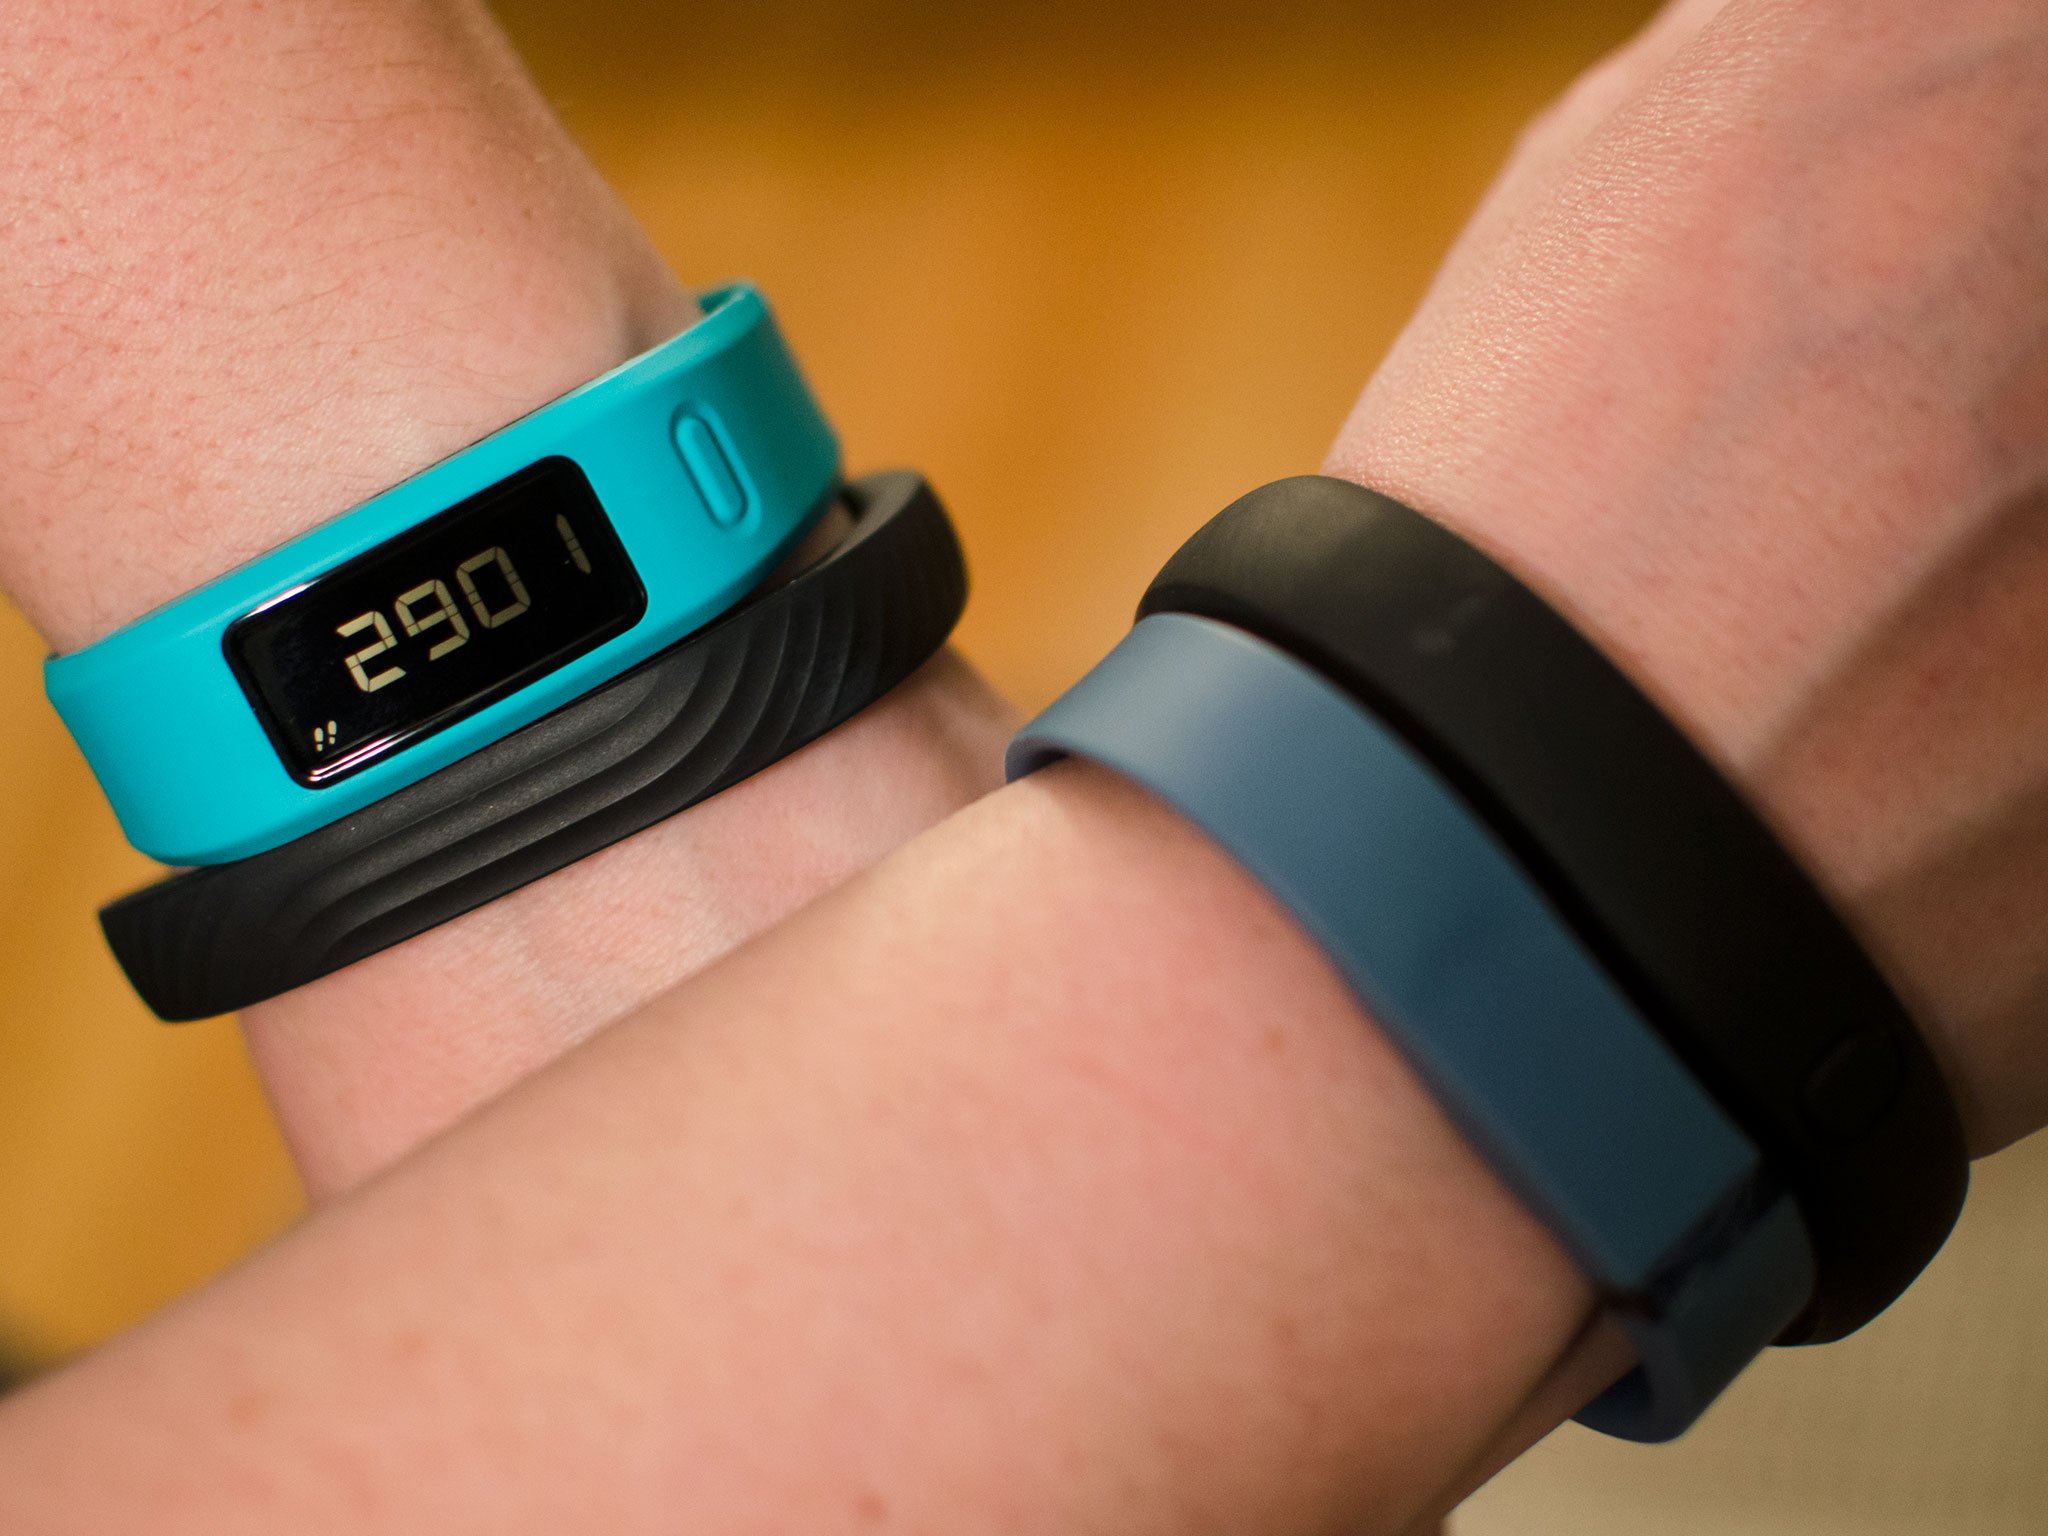 fitbits under $50